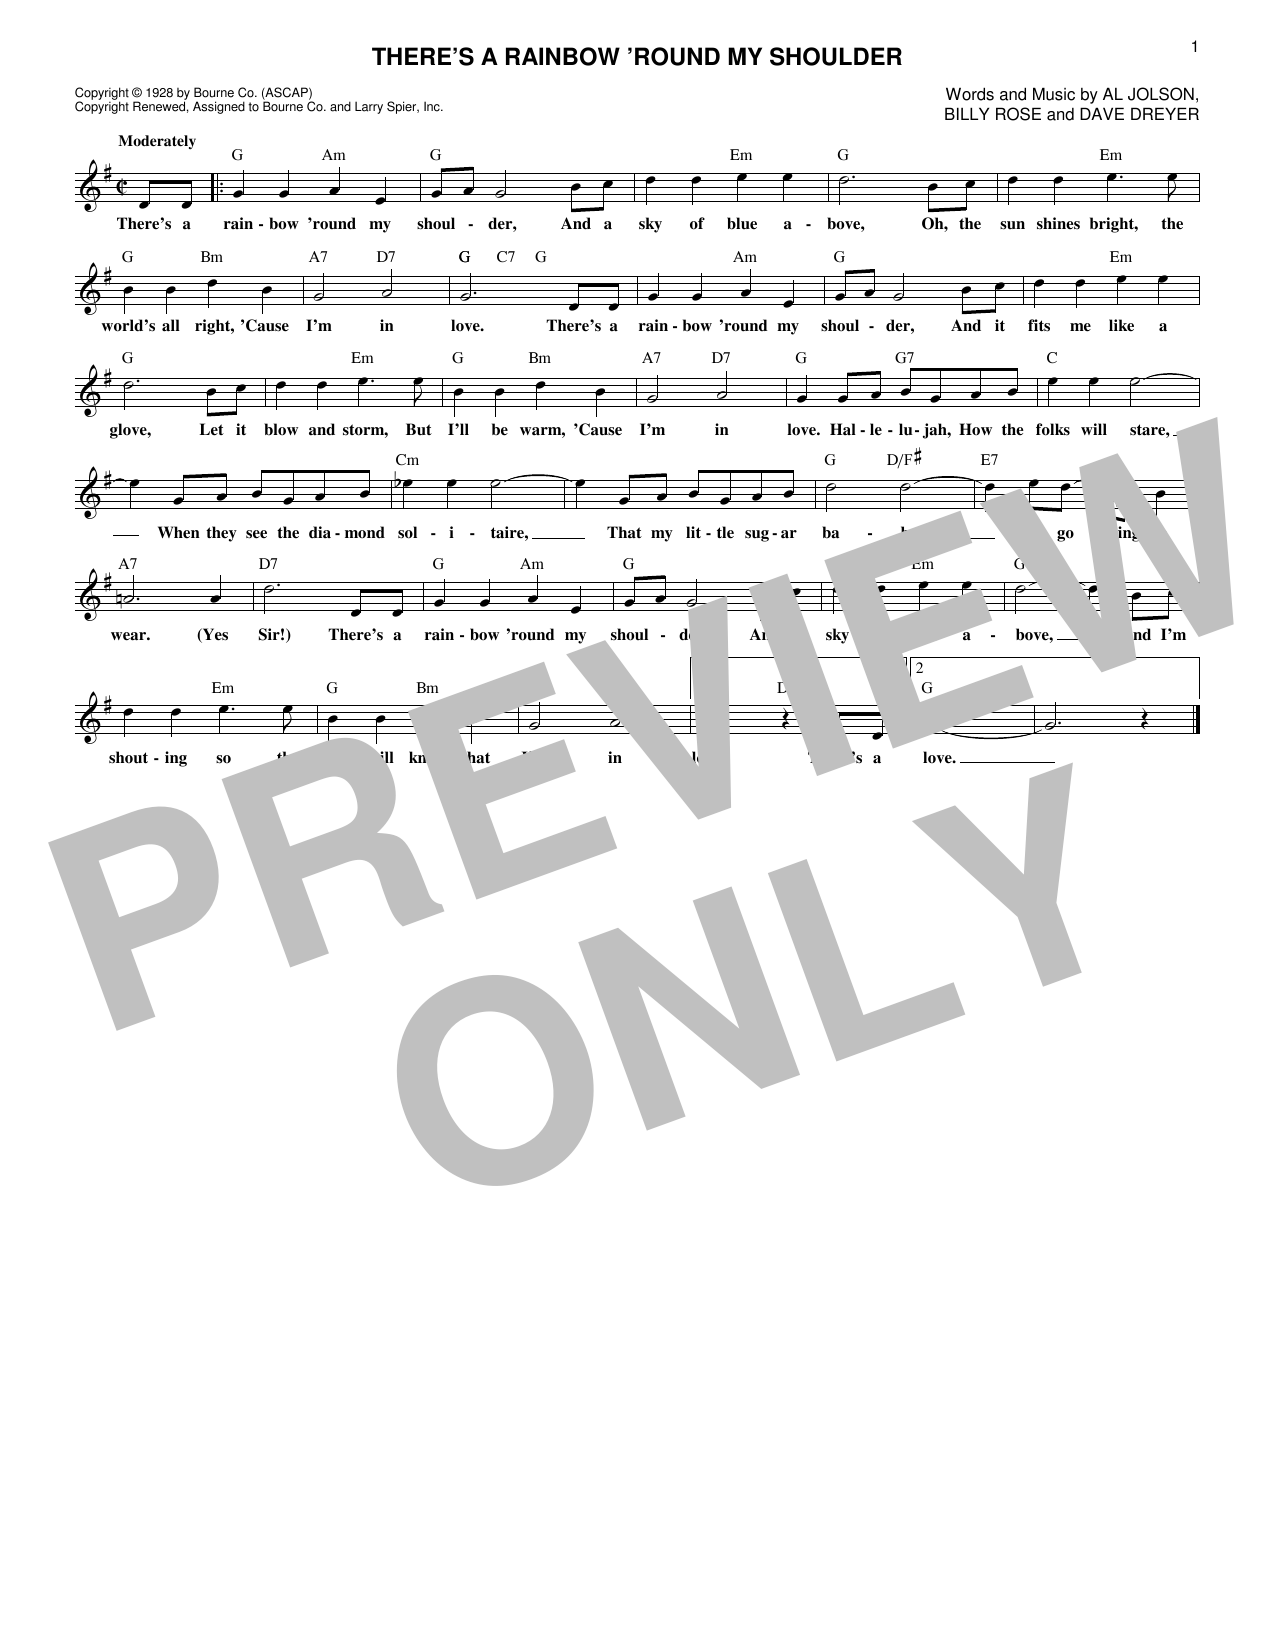 Billy Rose There's A Rainbow 'Round My Shoulder sheet music notes and chords. Download Printable PDF.